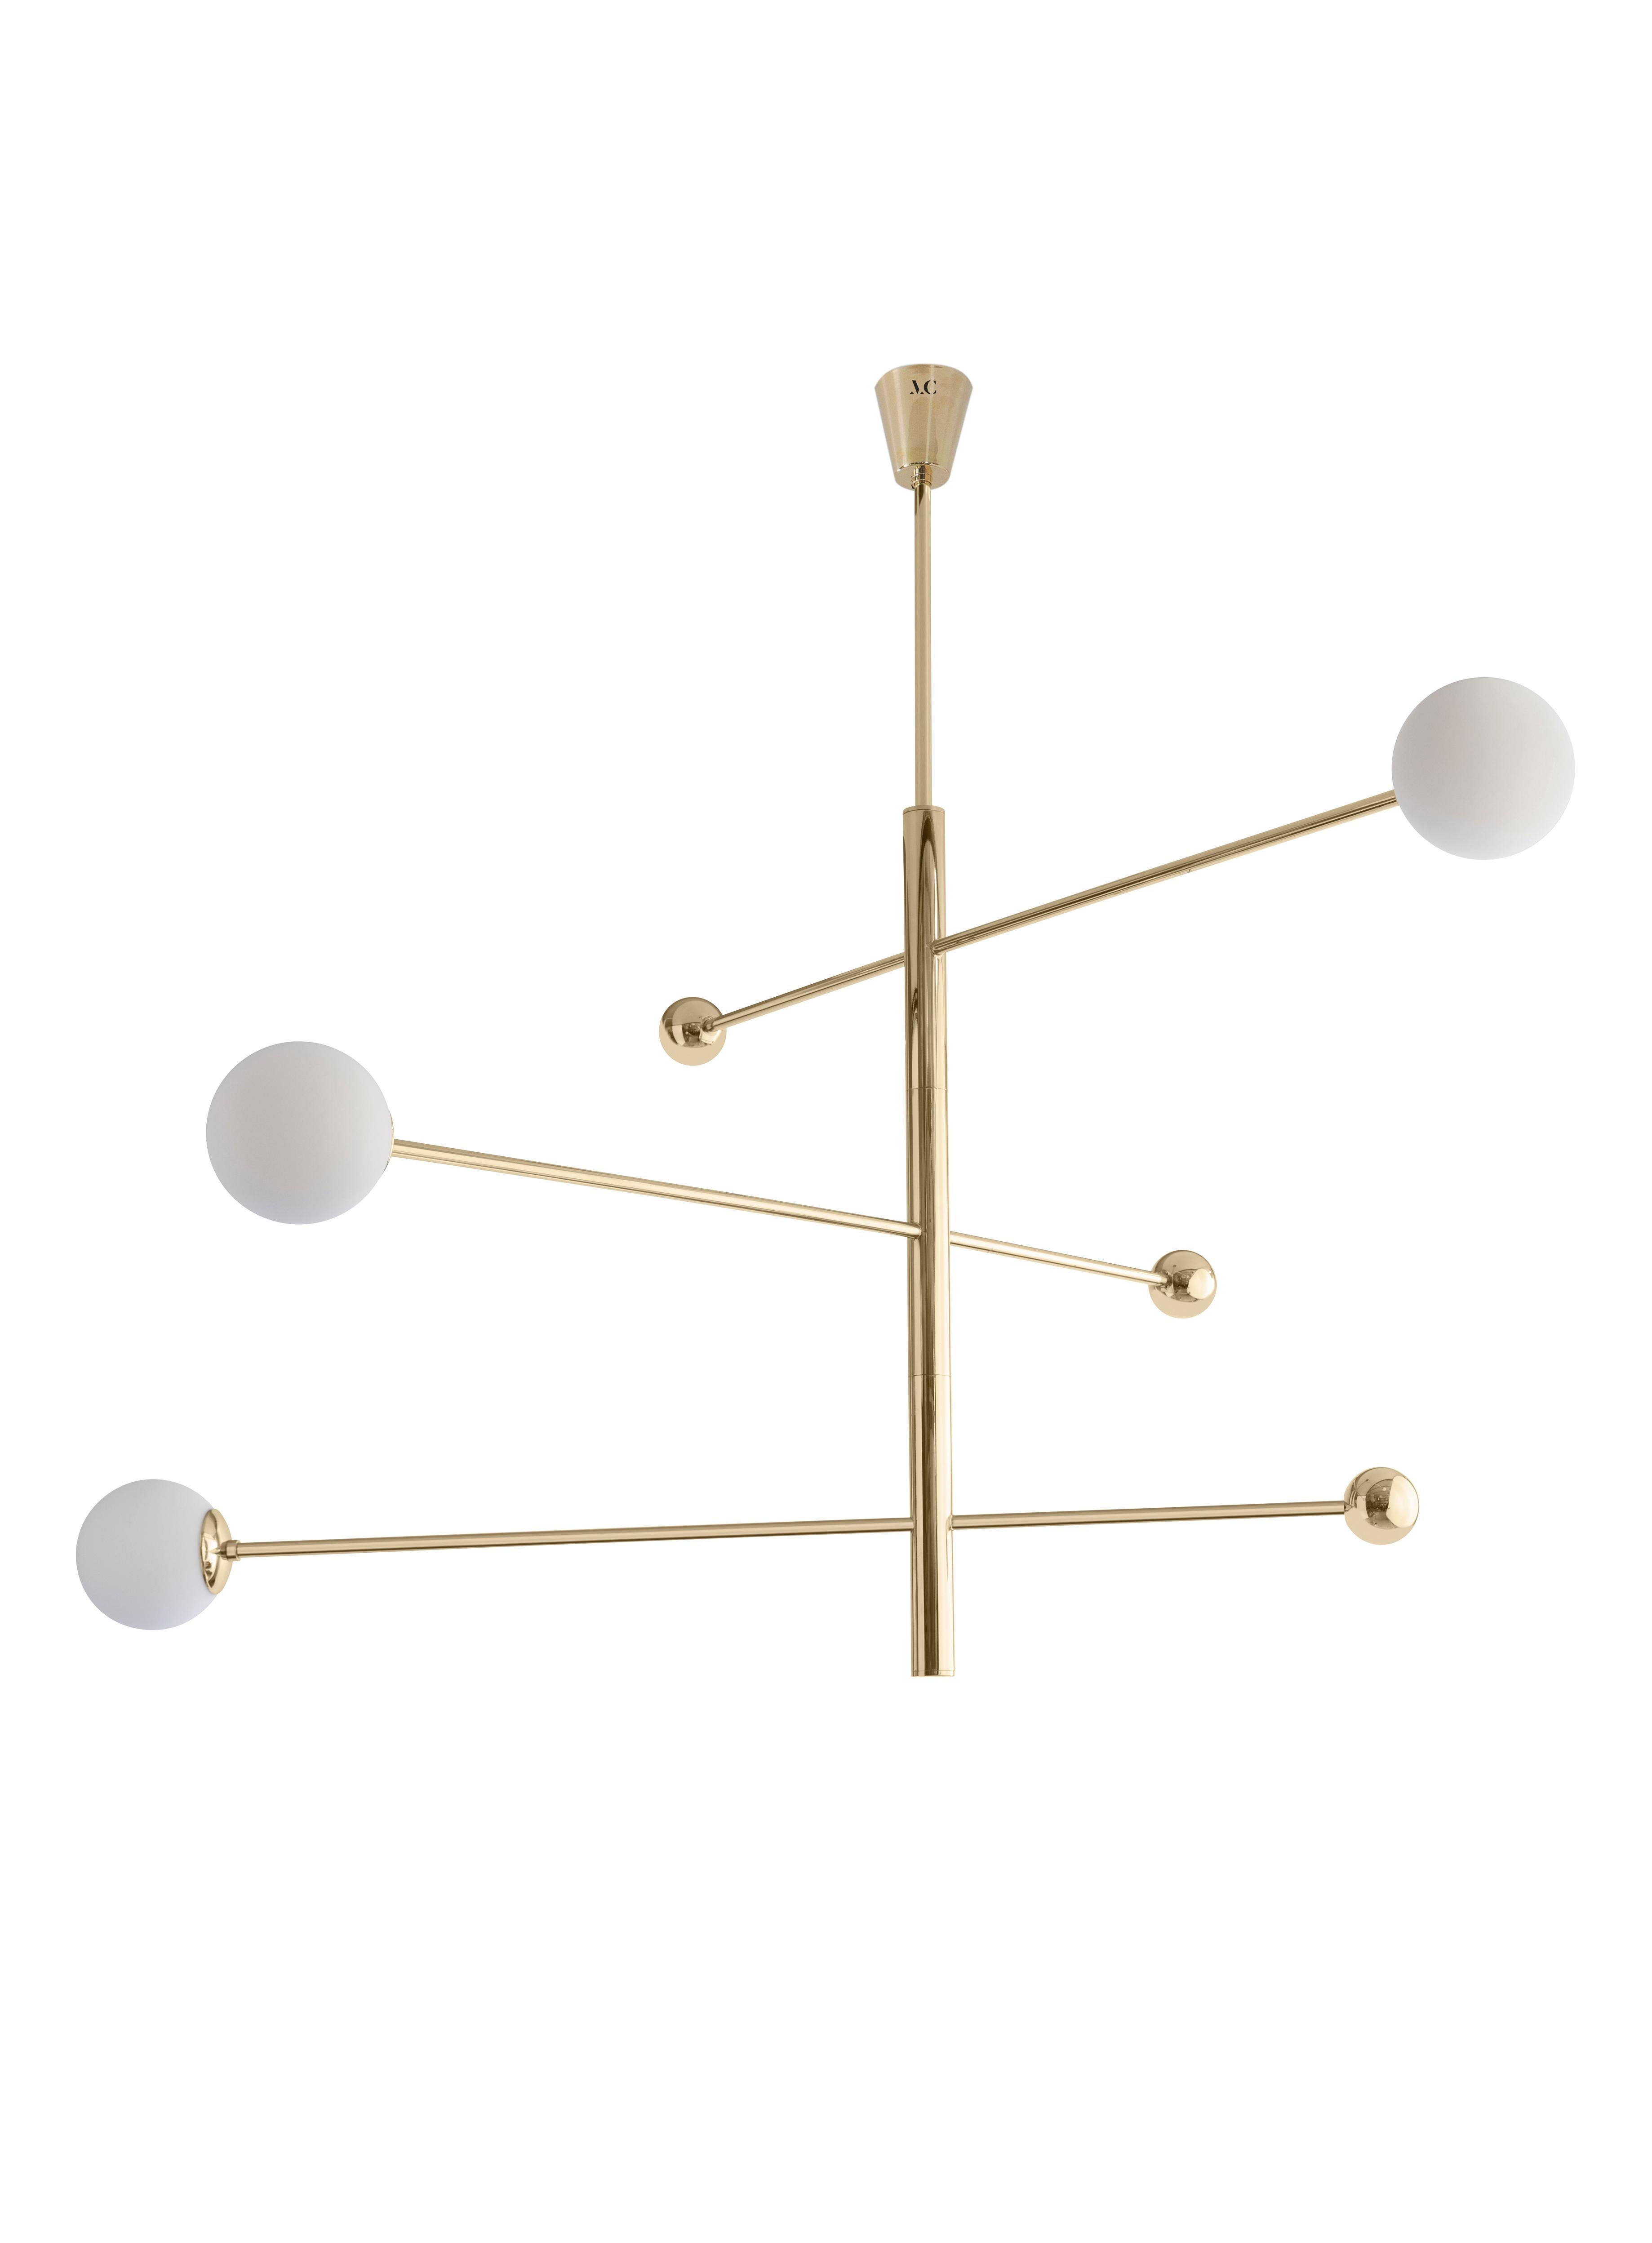 Chandelier 08 V2 by Magic Circus Editions
Dimensions: H 90 x W 156 cm
Spheres: Glass 70 mm
 
Materials: Smooth brass, glass
Available finishes: Brass, nickel, black brass and red brick
6 × Led G9 / 5W. 220V

All our lamps can be wired according to